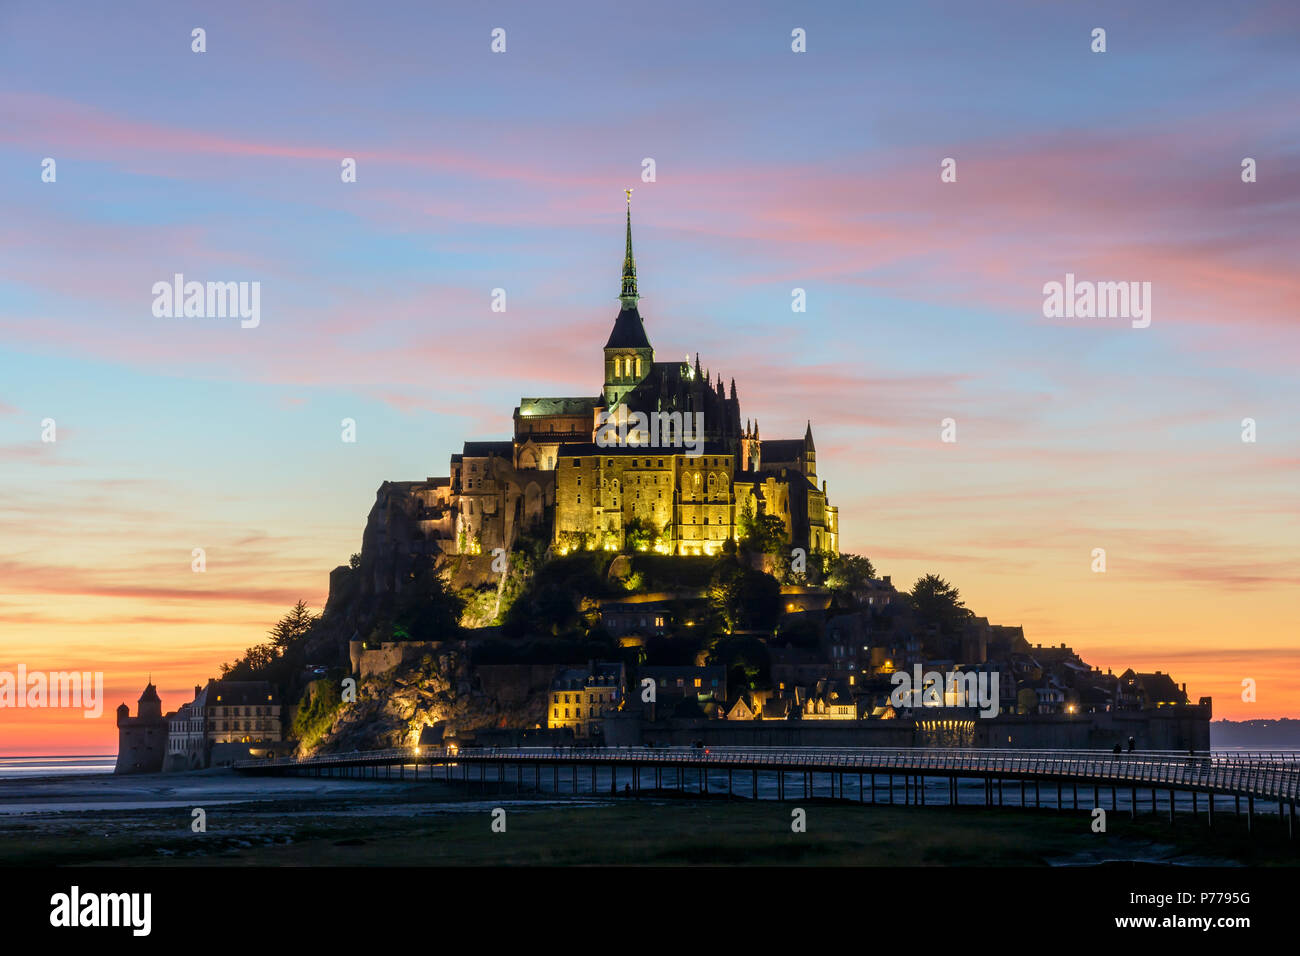 View of the Mont-Saint-Michel tidal island in Normandy, France, illuminated at nightfall with the jetty on stilts and purple clouds in the sky. Stock Photo